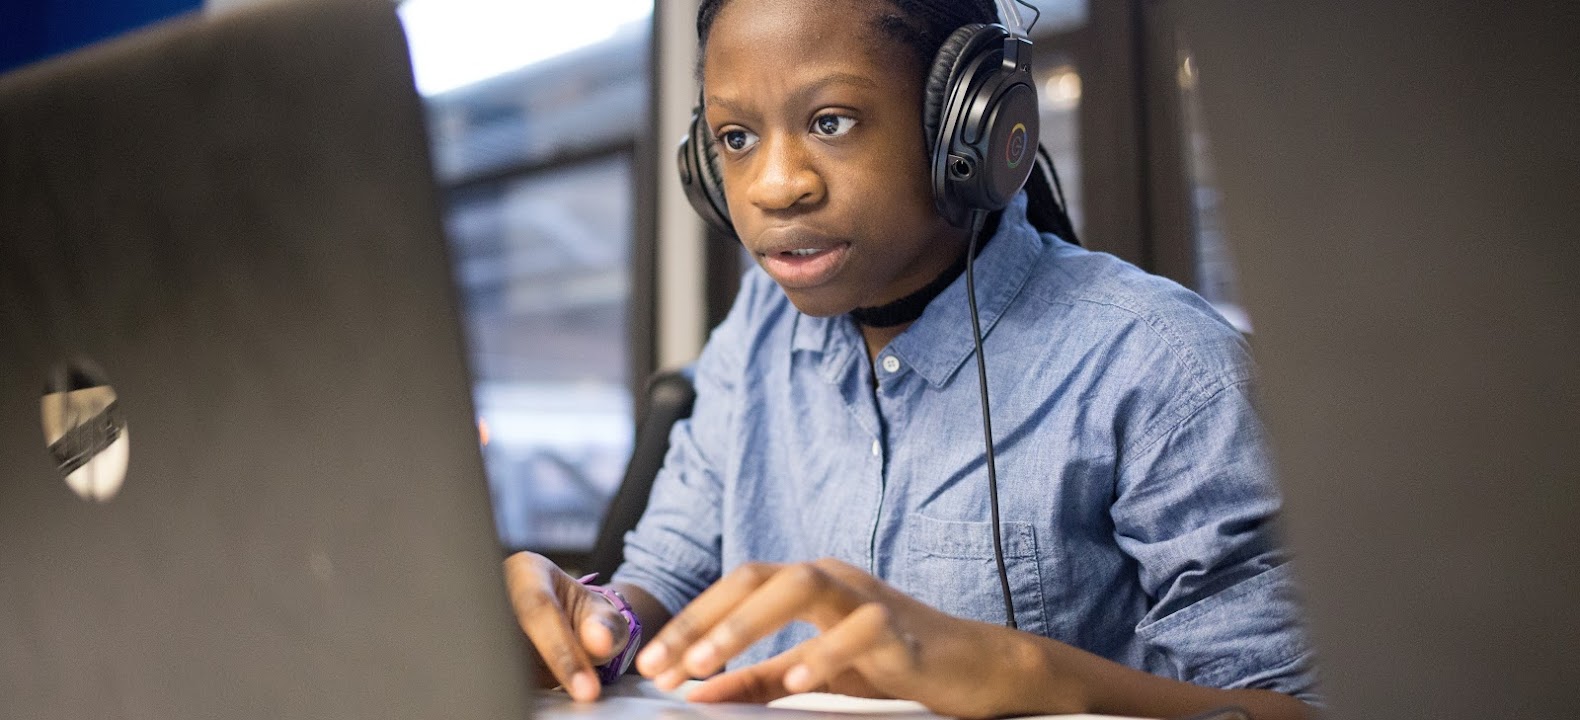 Black female student engages with technology.